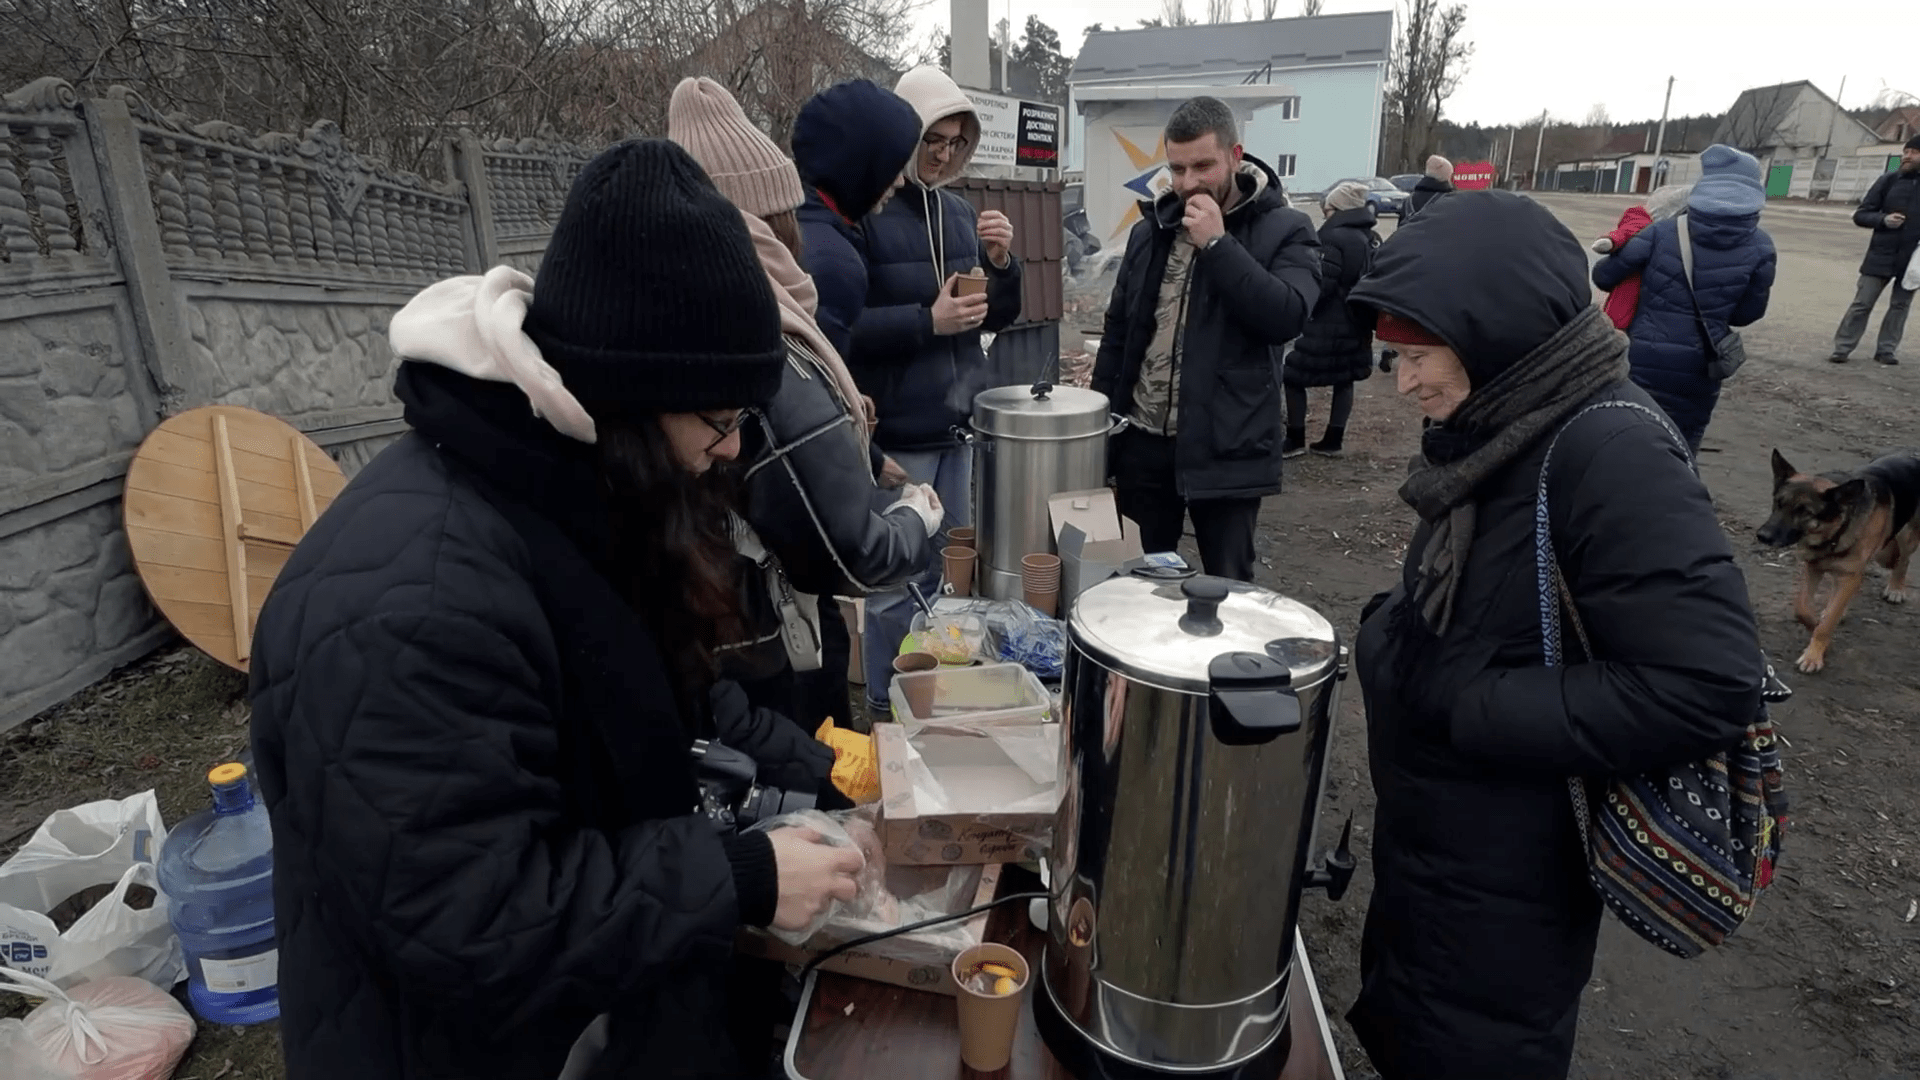 At the end of February, ministers from Kyiv Messianic Jewish Congregation made a trip to Moshun village in Ukraine.